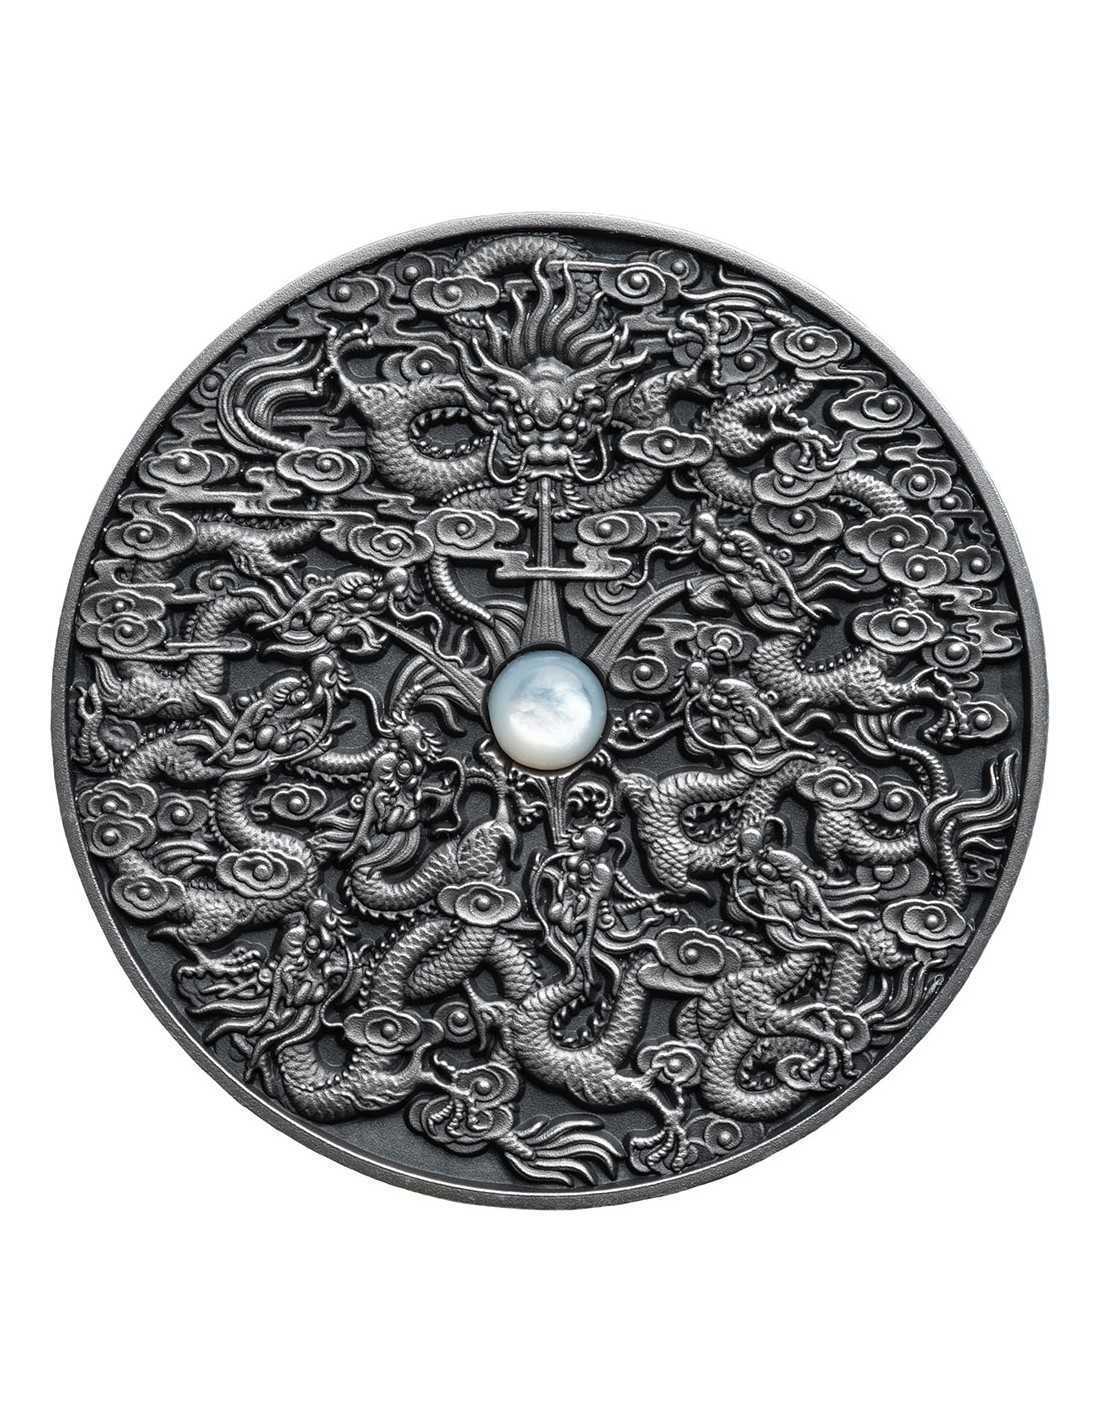 NINE DRAGONS Chinese Legends 2 Oz Silver Coin 5$ Niue 2020